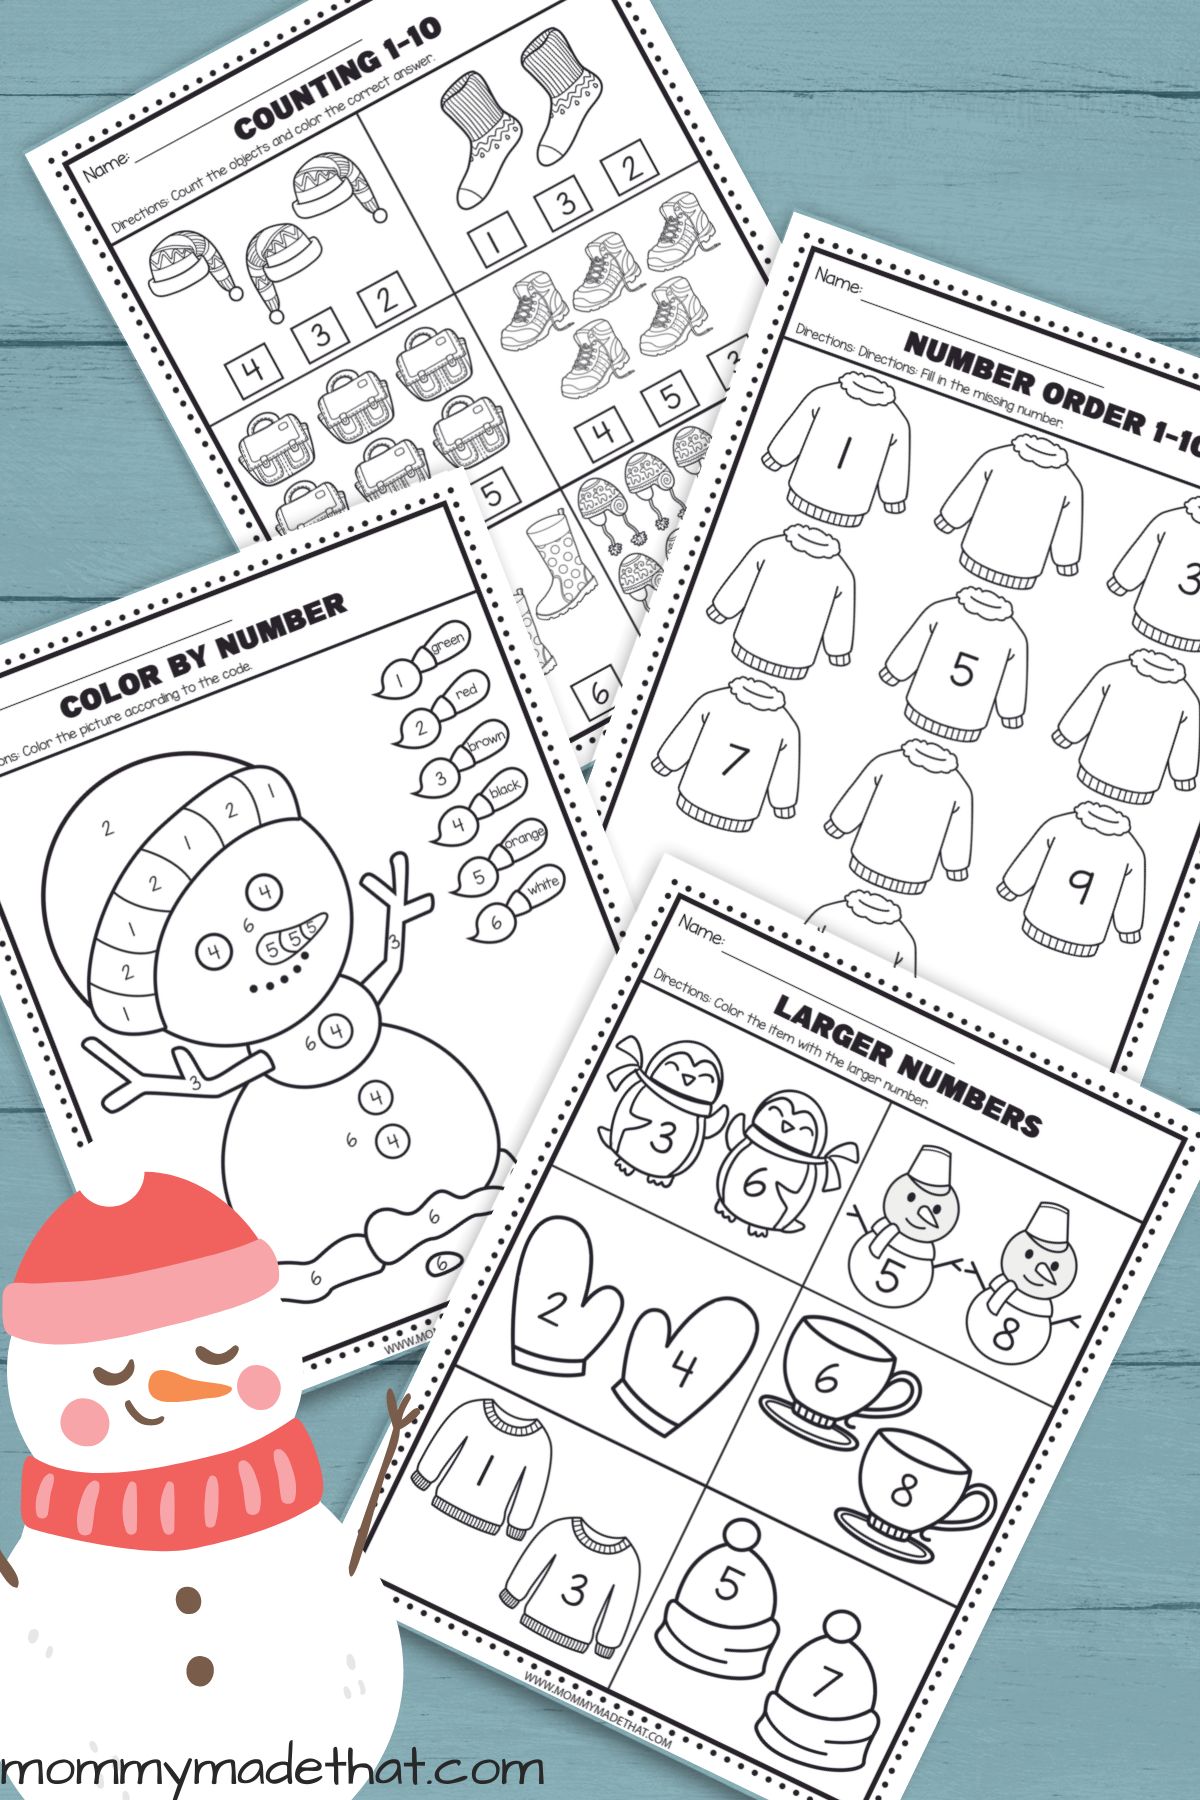 Free Winter Math Patterns - Cut and Paste - Free4Classrooms